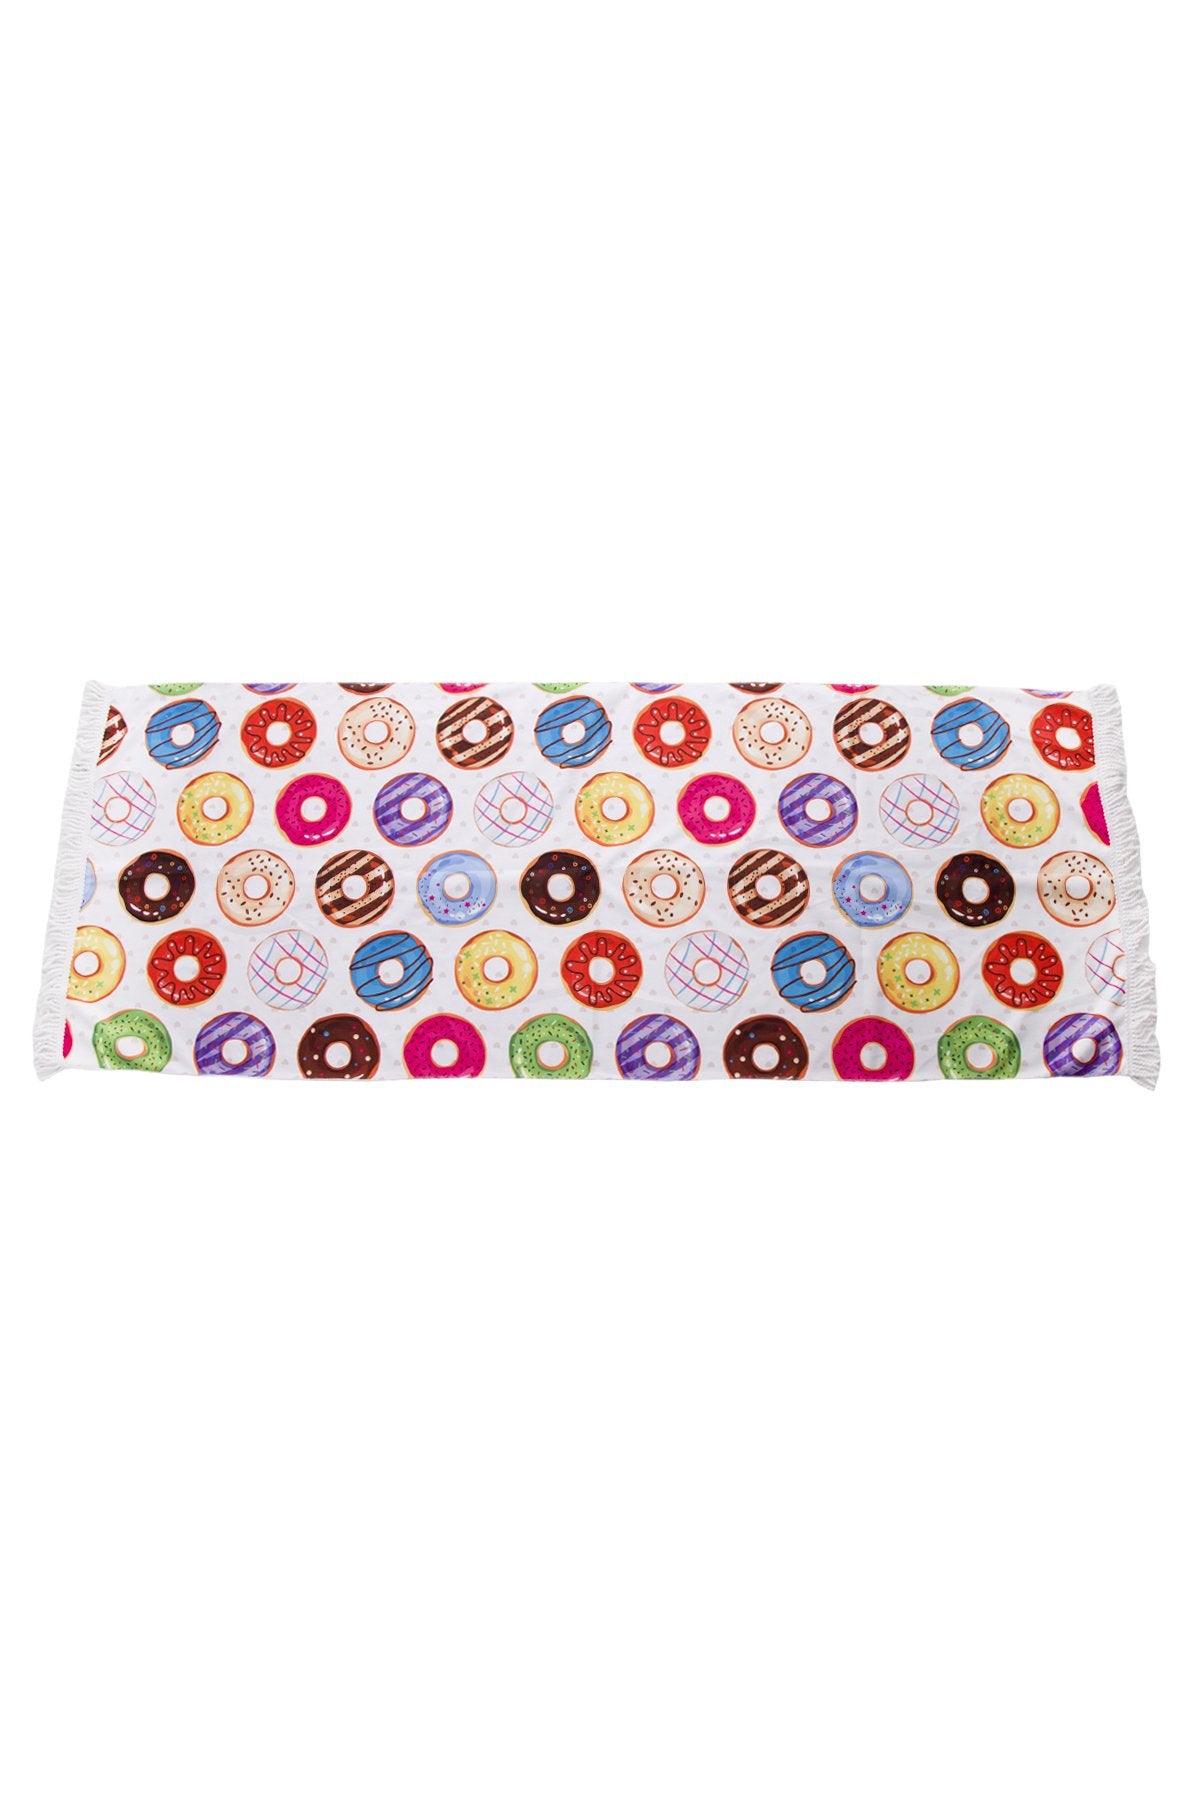 Donuts Print Wholesale Rectangle Beach Towel With Short Fringes 